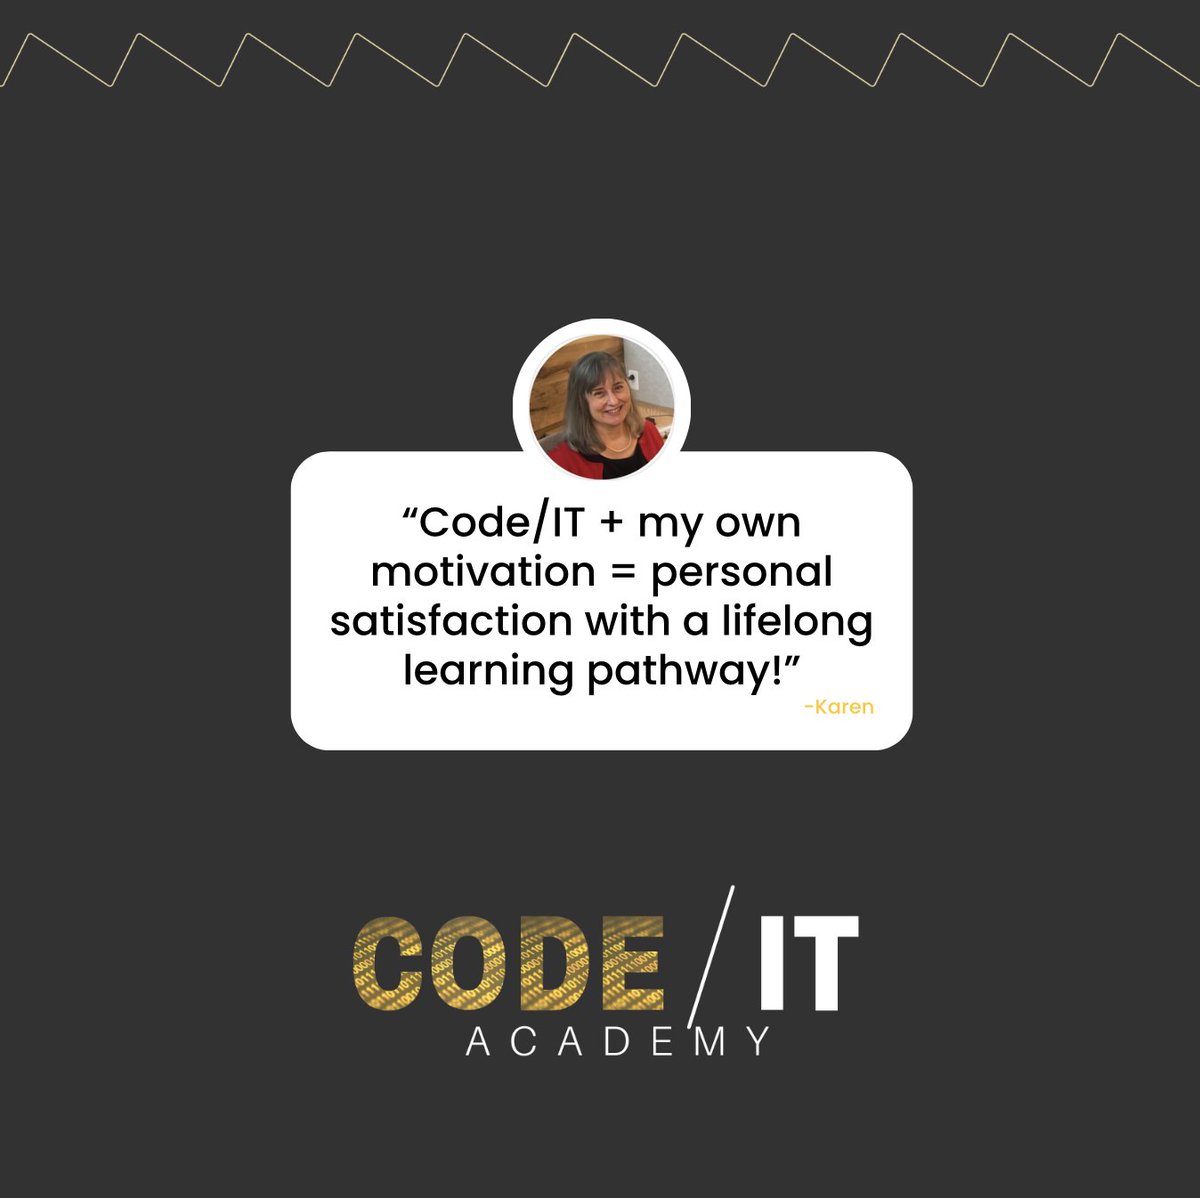 Ready to kickstart your IT journey? 💻 Applications for Code/IT Academy are open until May 31st for the AWS Cloud Practitioner cohort! Join Karen and countless others who've used this free program to level up their tech careers. Apply now!